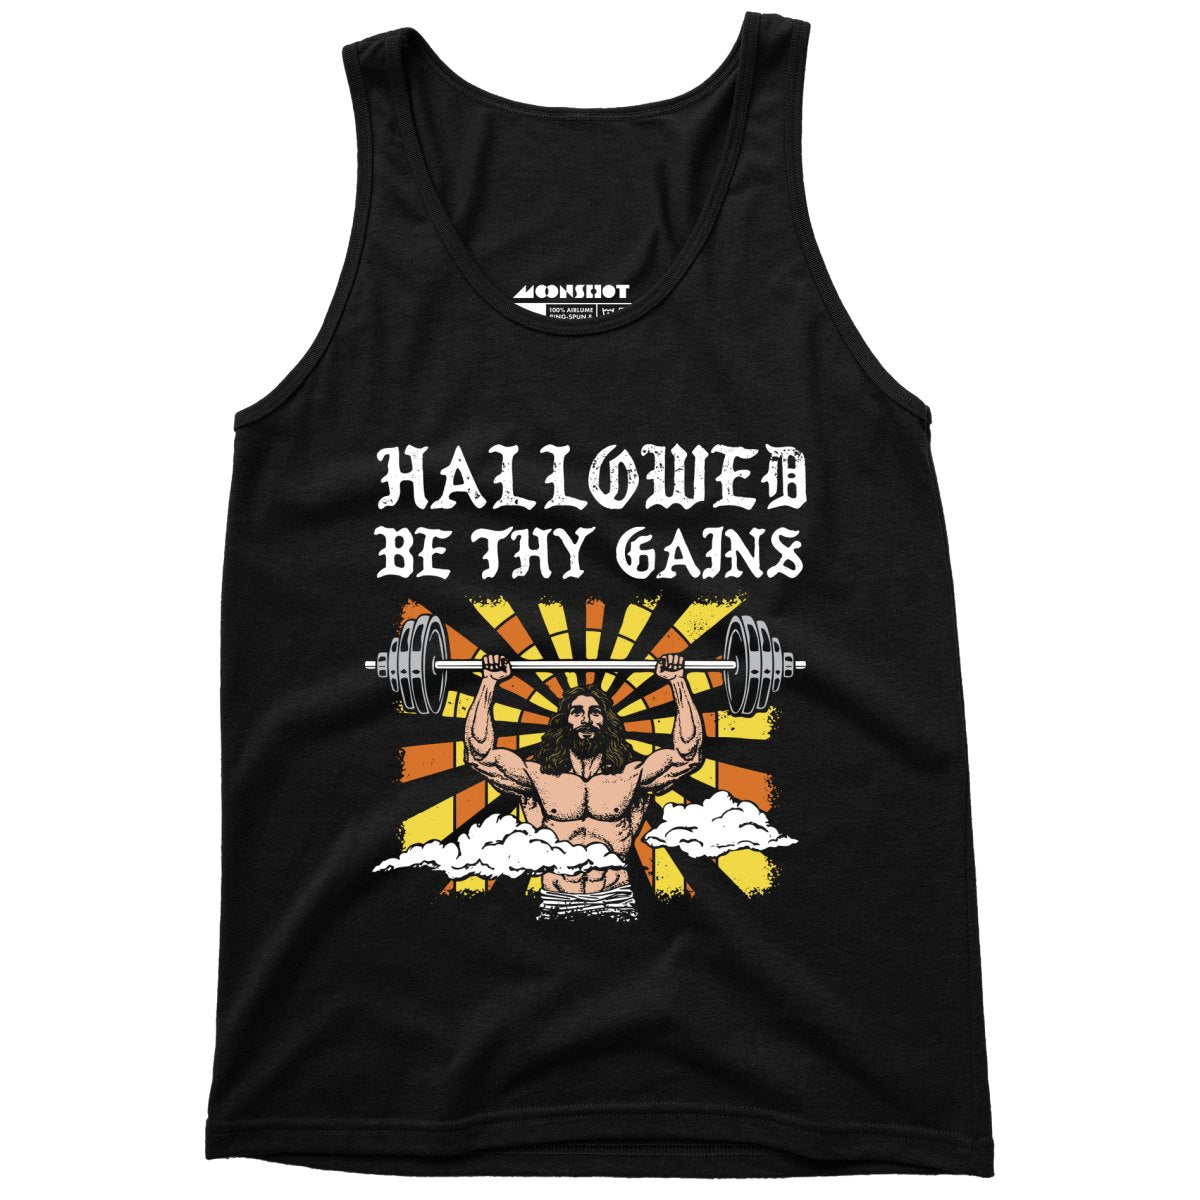 Hallowed Be Thy Gains - Unisex Tank Top